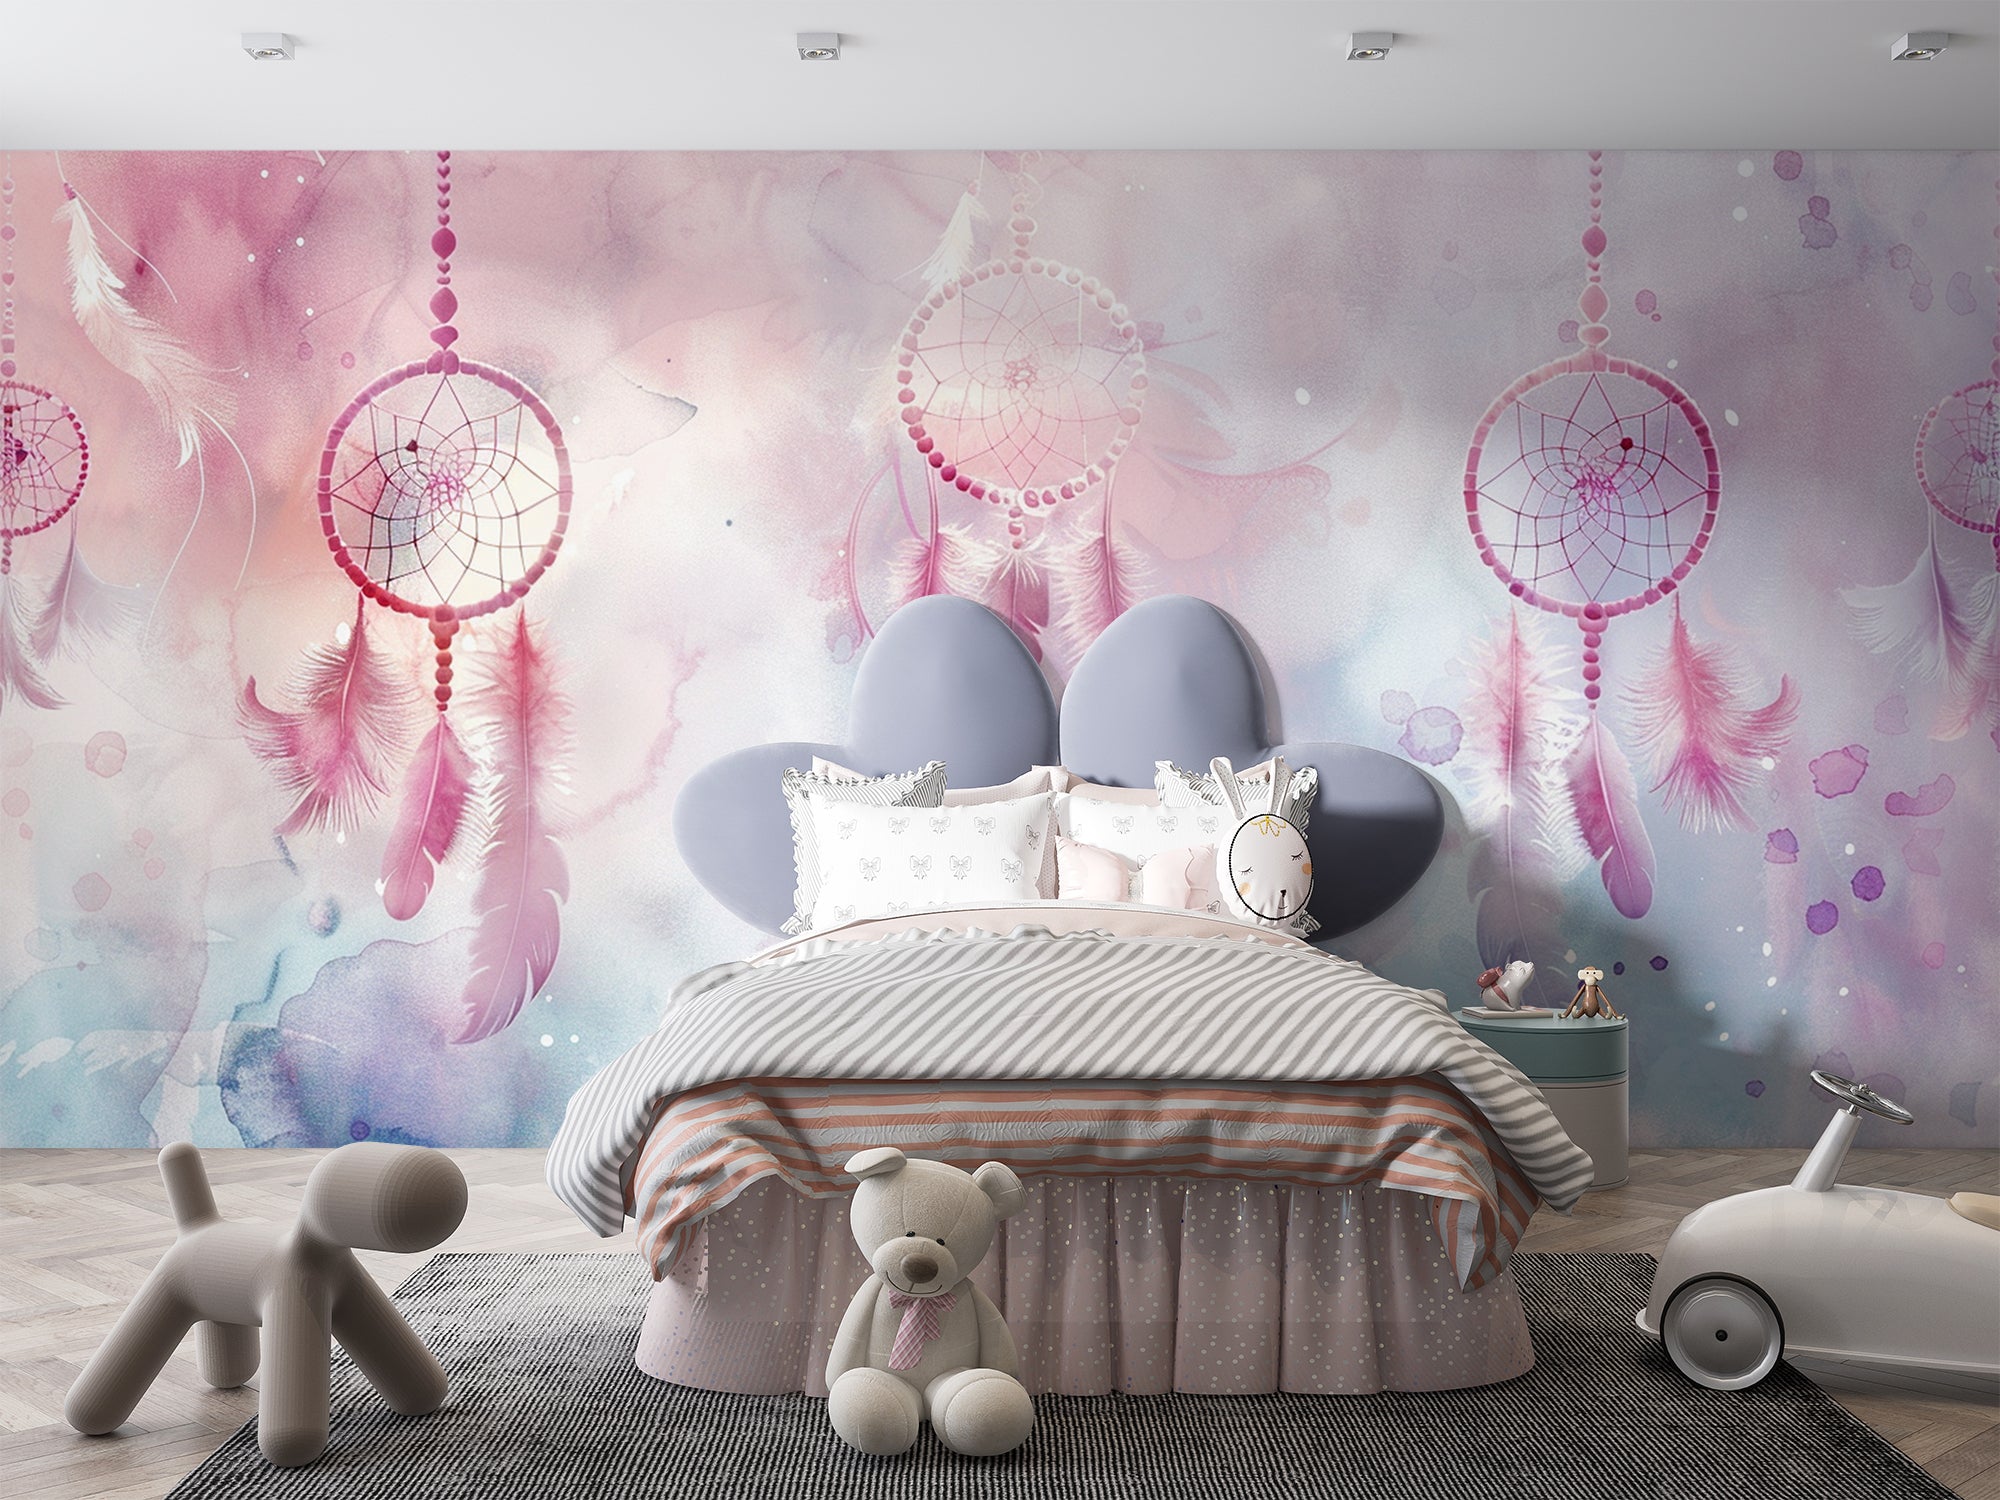 Dreamcatcher: The Dance of Feathers in Wallpaper